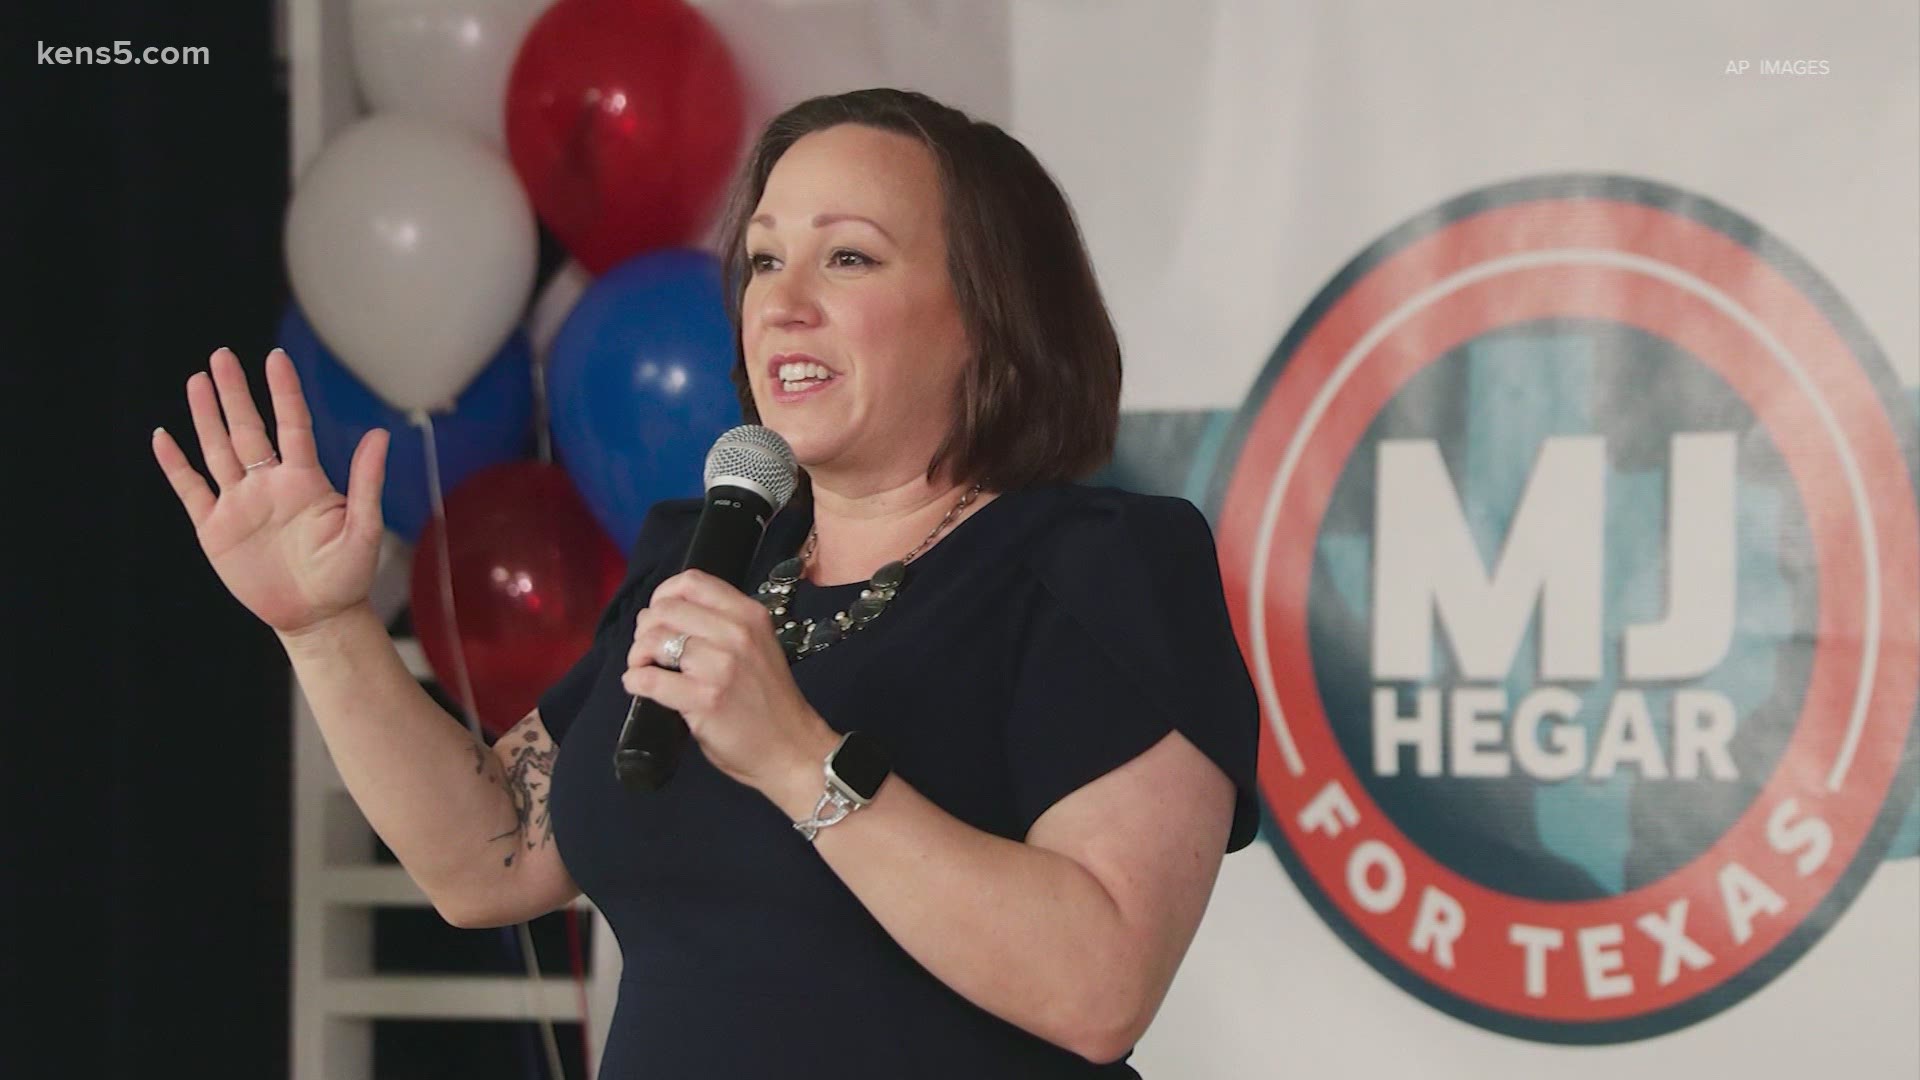 A major race in Texas - the battle for a U.S. Senate seat.